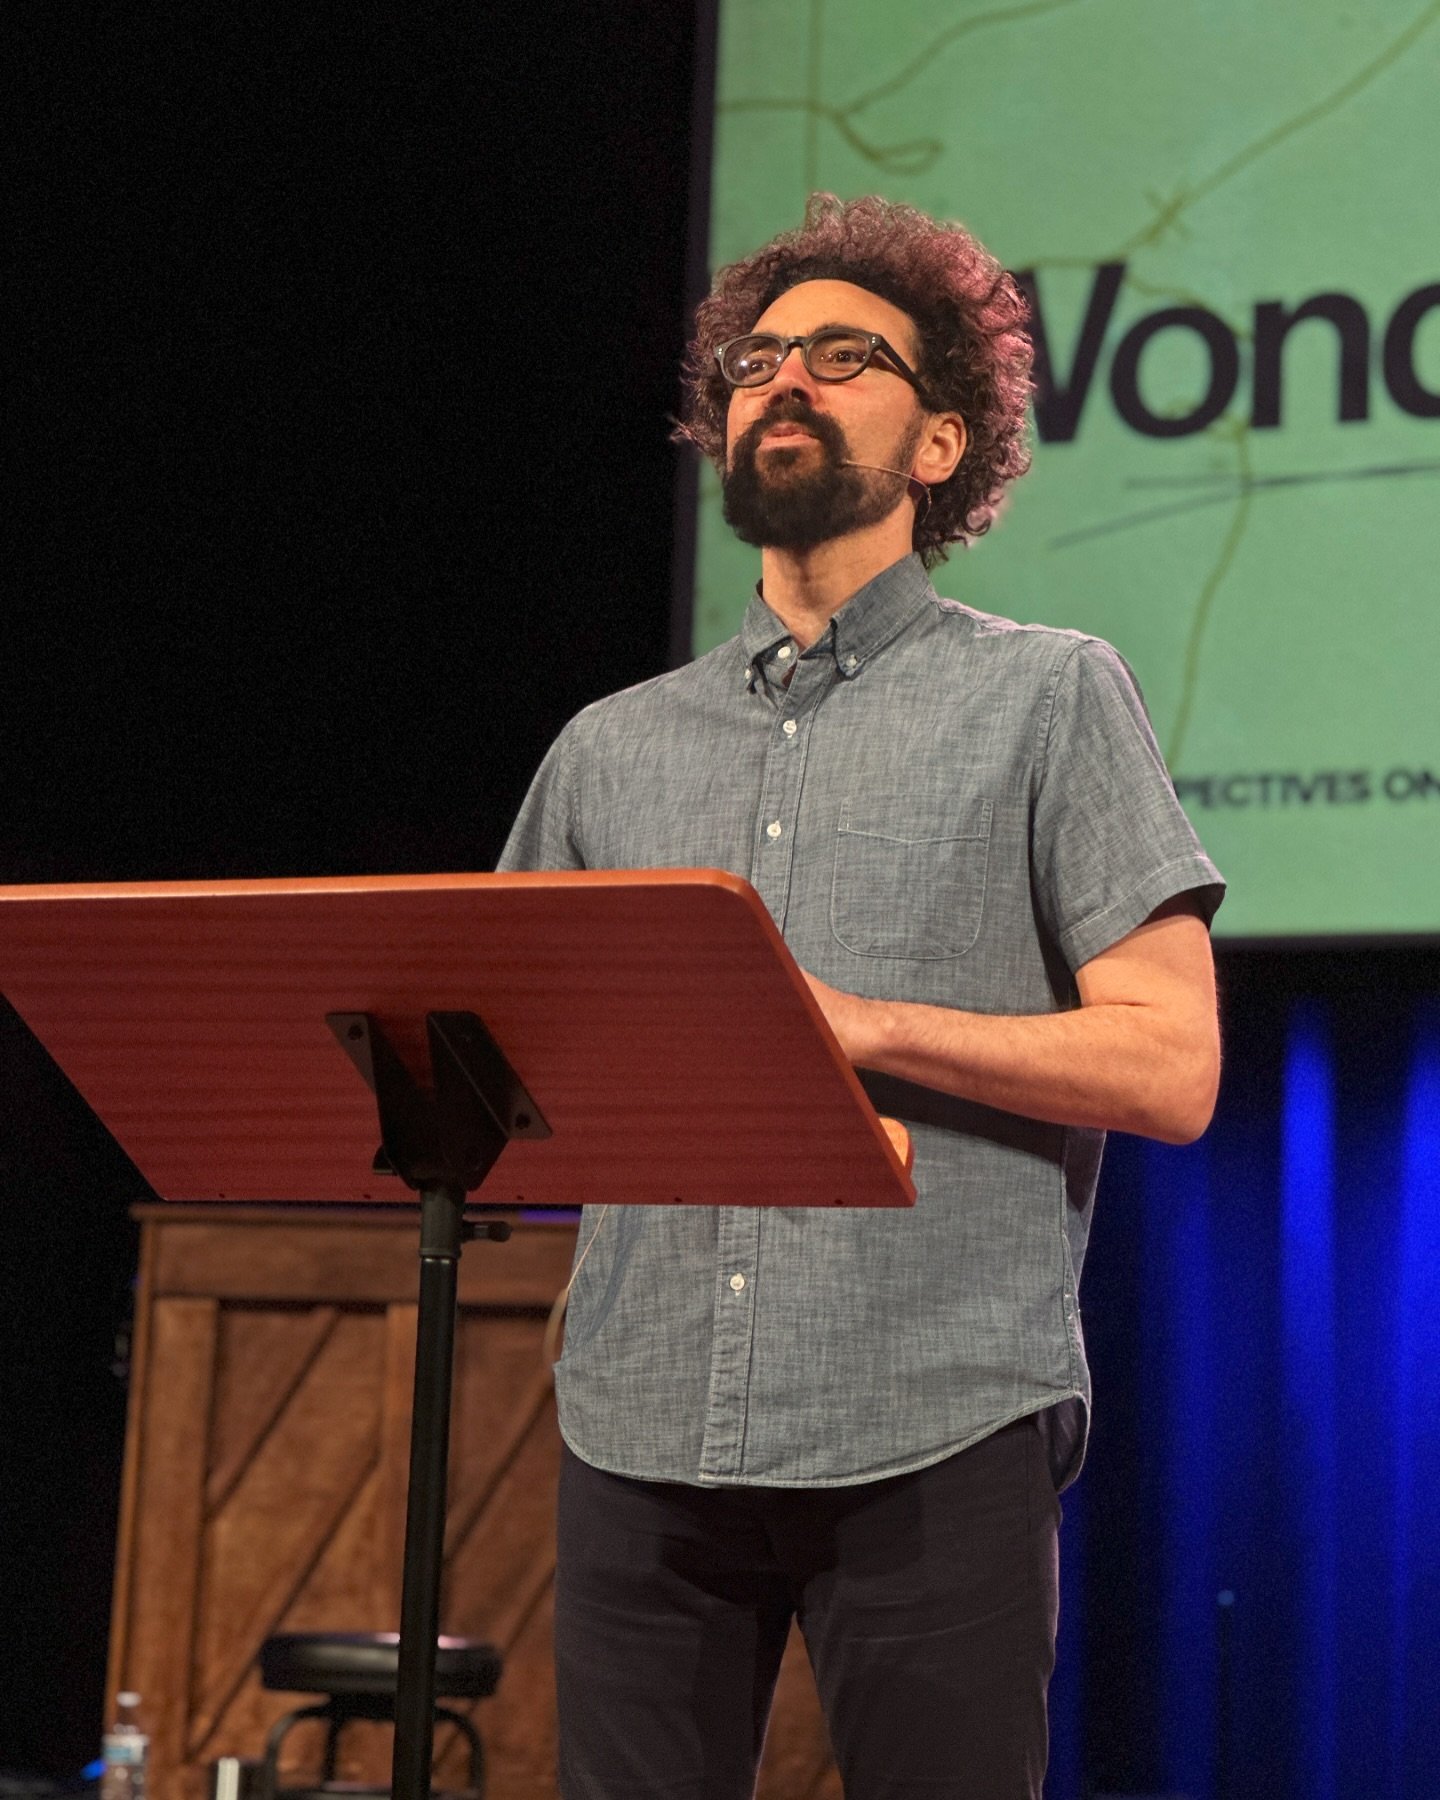 Thank you @joshuabutlerpdx for joining us at WestGate today. 
If you missed today&rsquo;s sermon, be sure to check out our YouTube channel to watch it back.